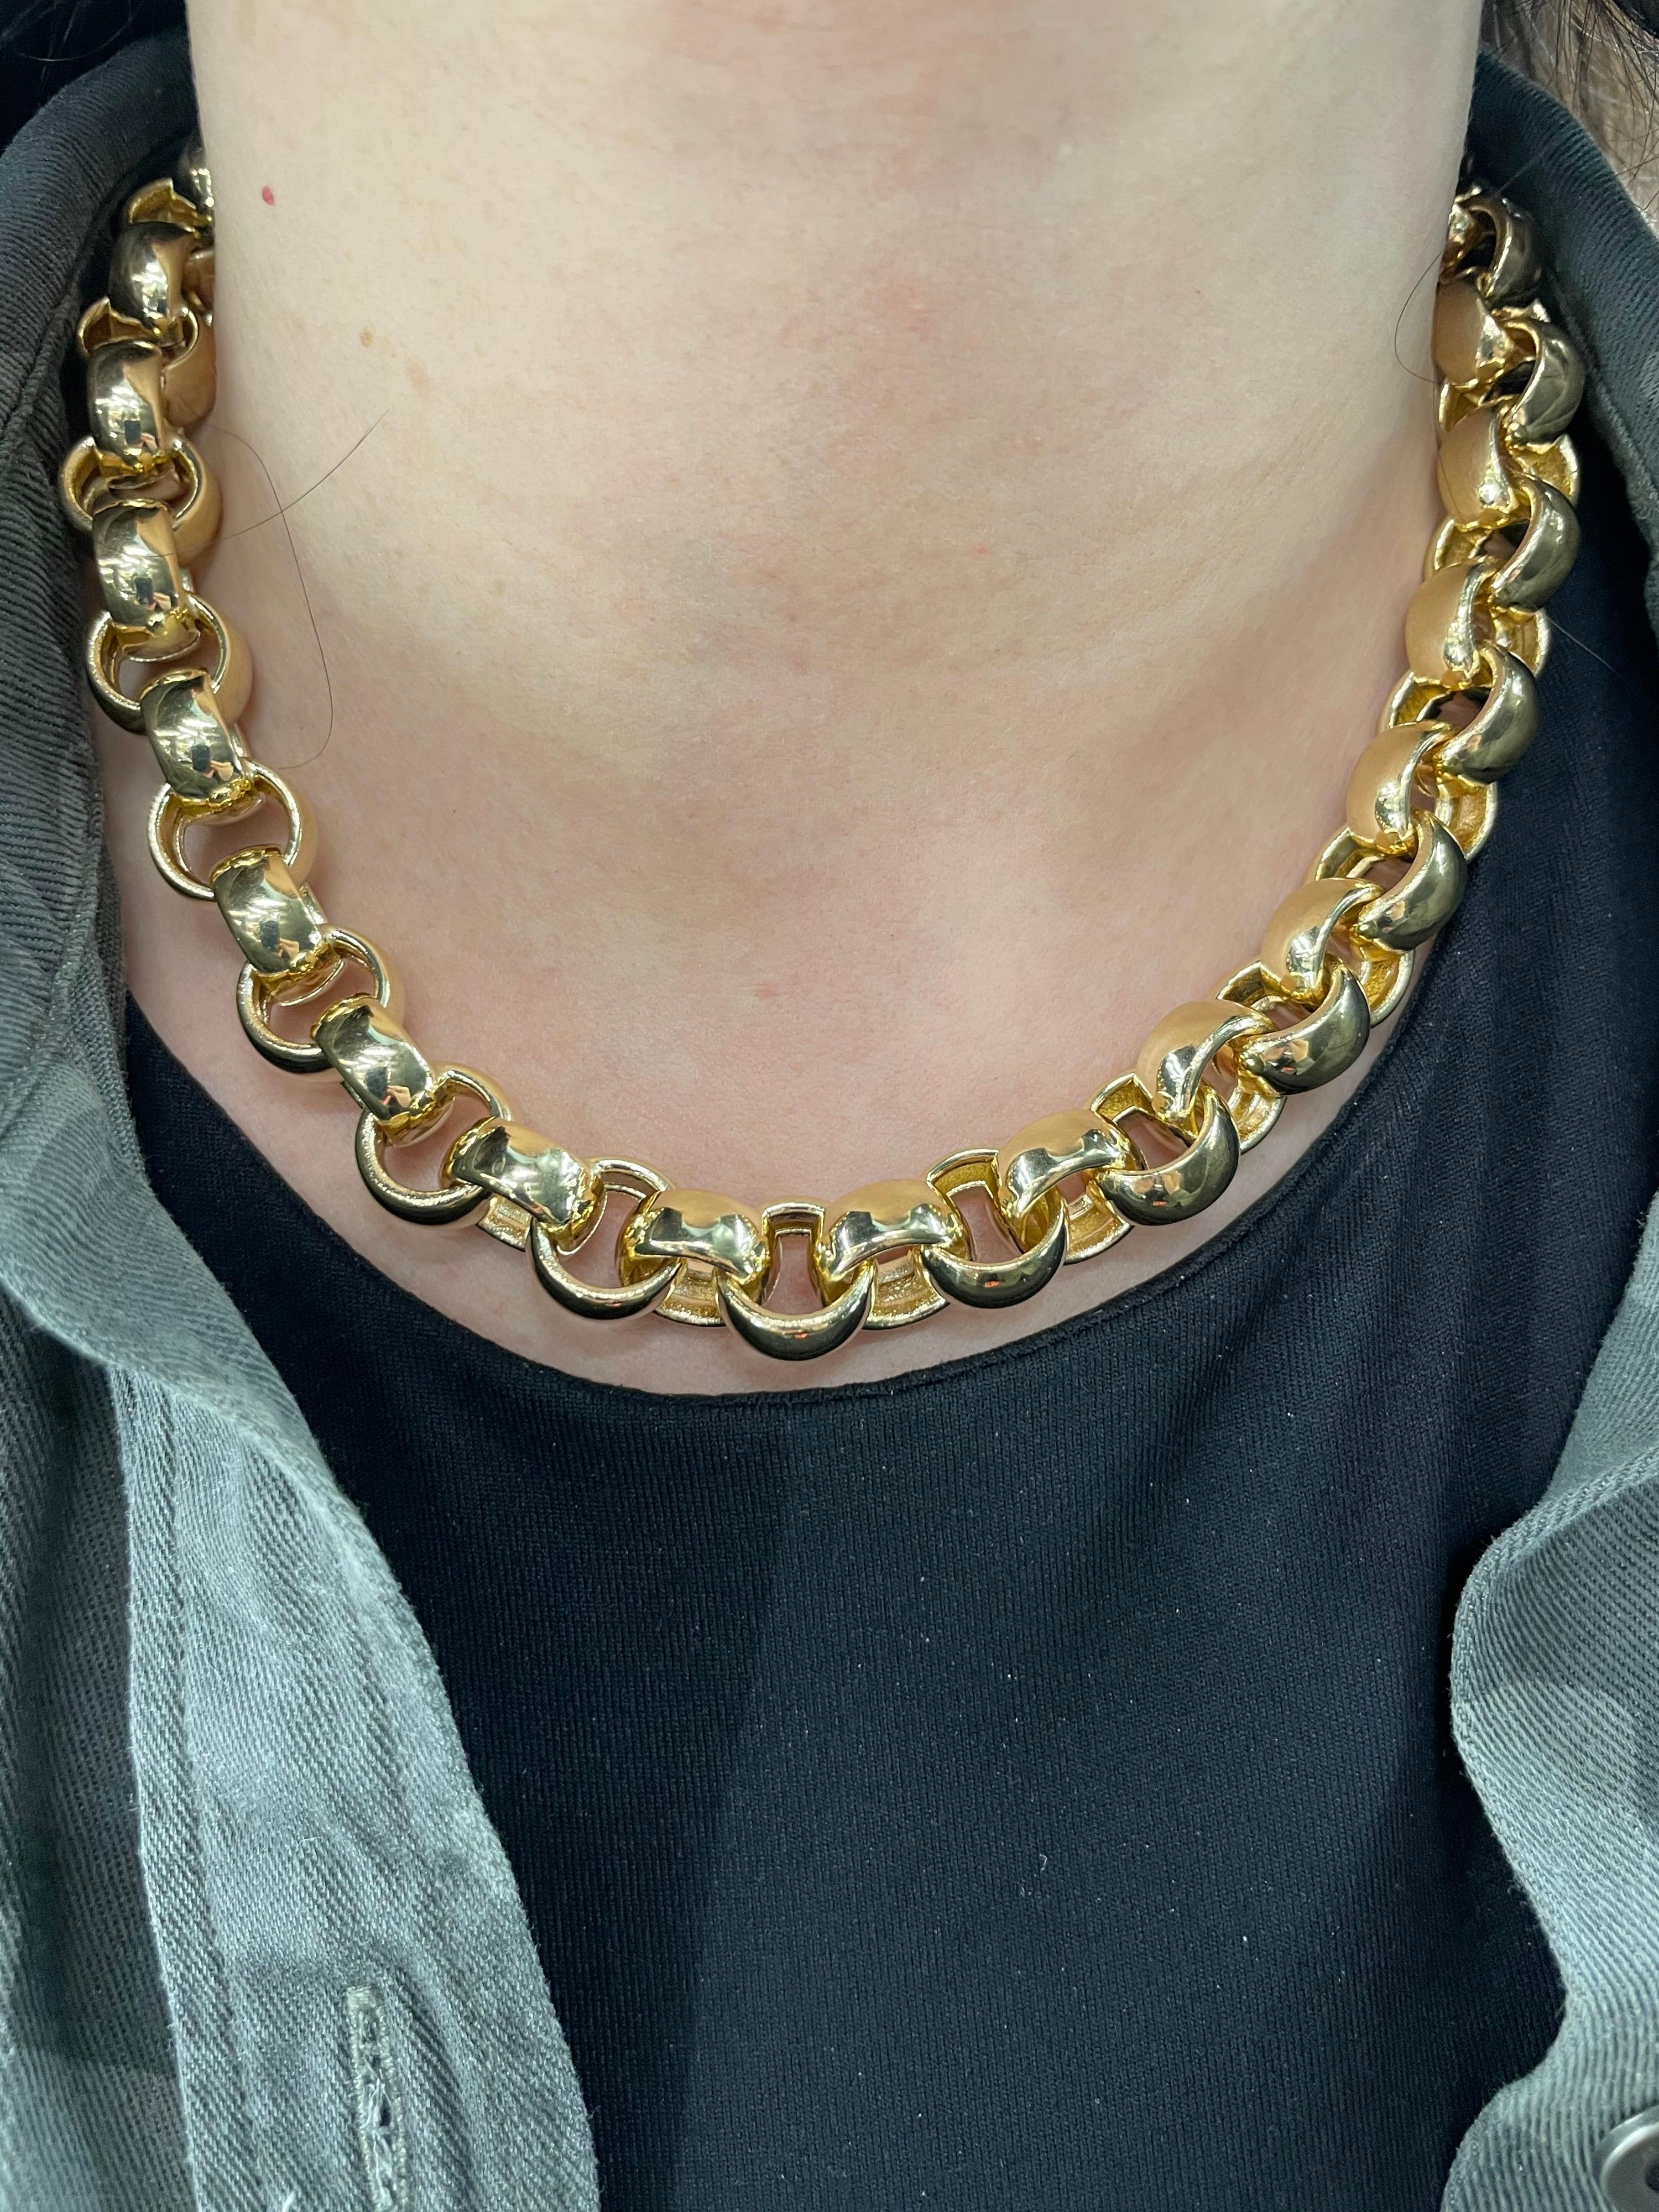 14 Karat Yellow Gold Link Necklace Made in Turkey 62.2 Grams In Excellent Condition For Sale In New York, NY